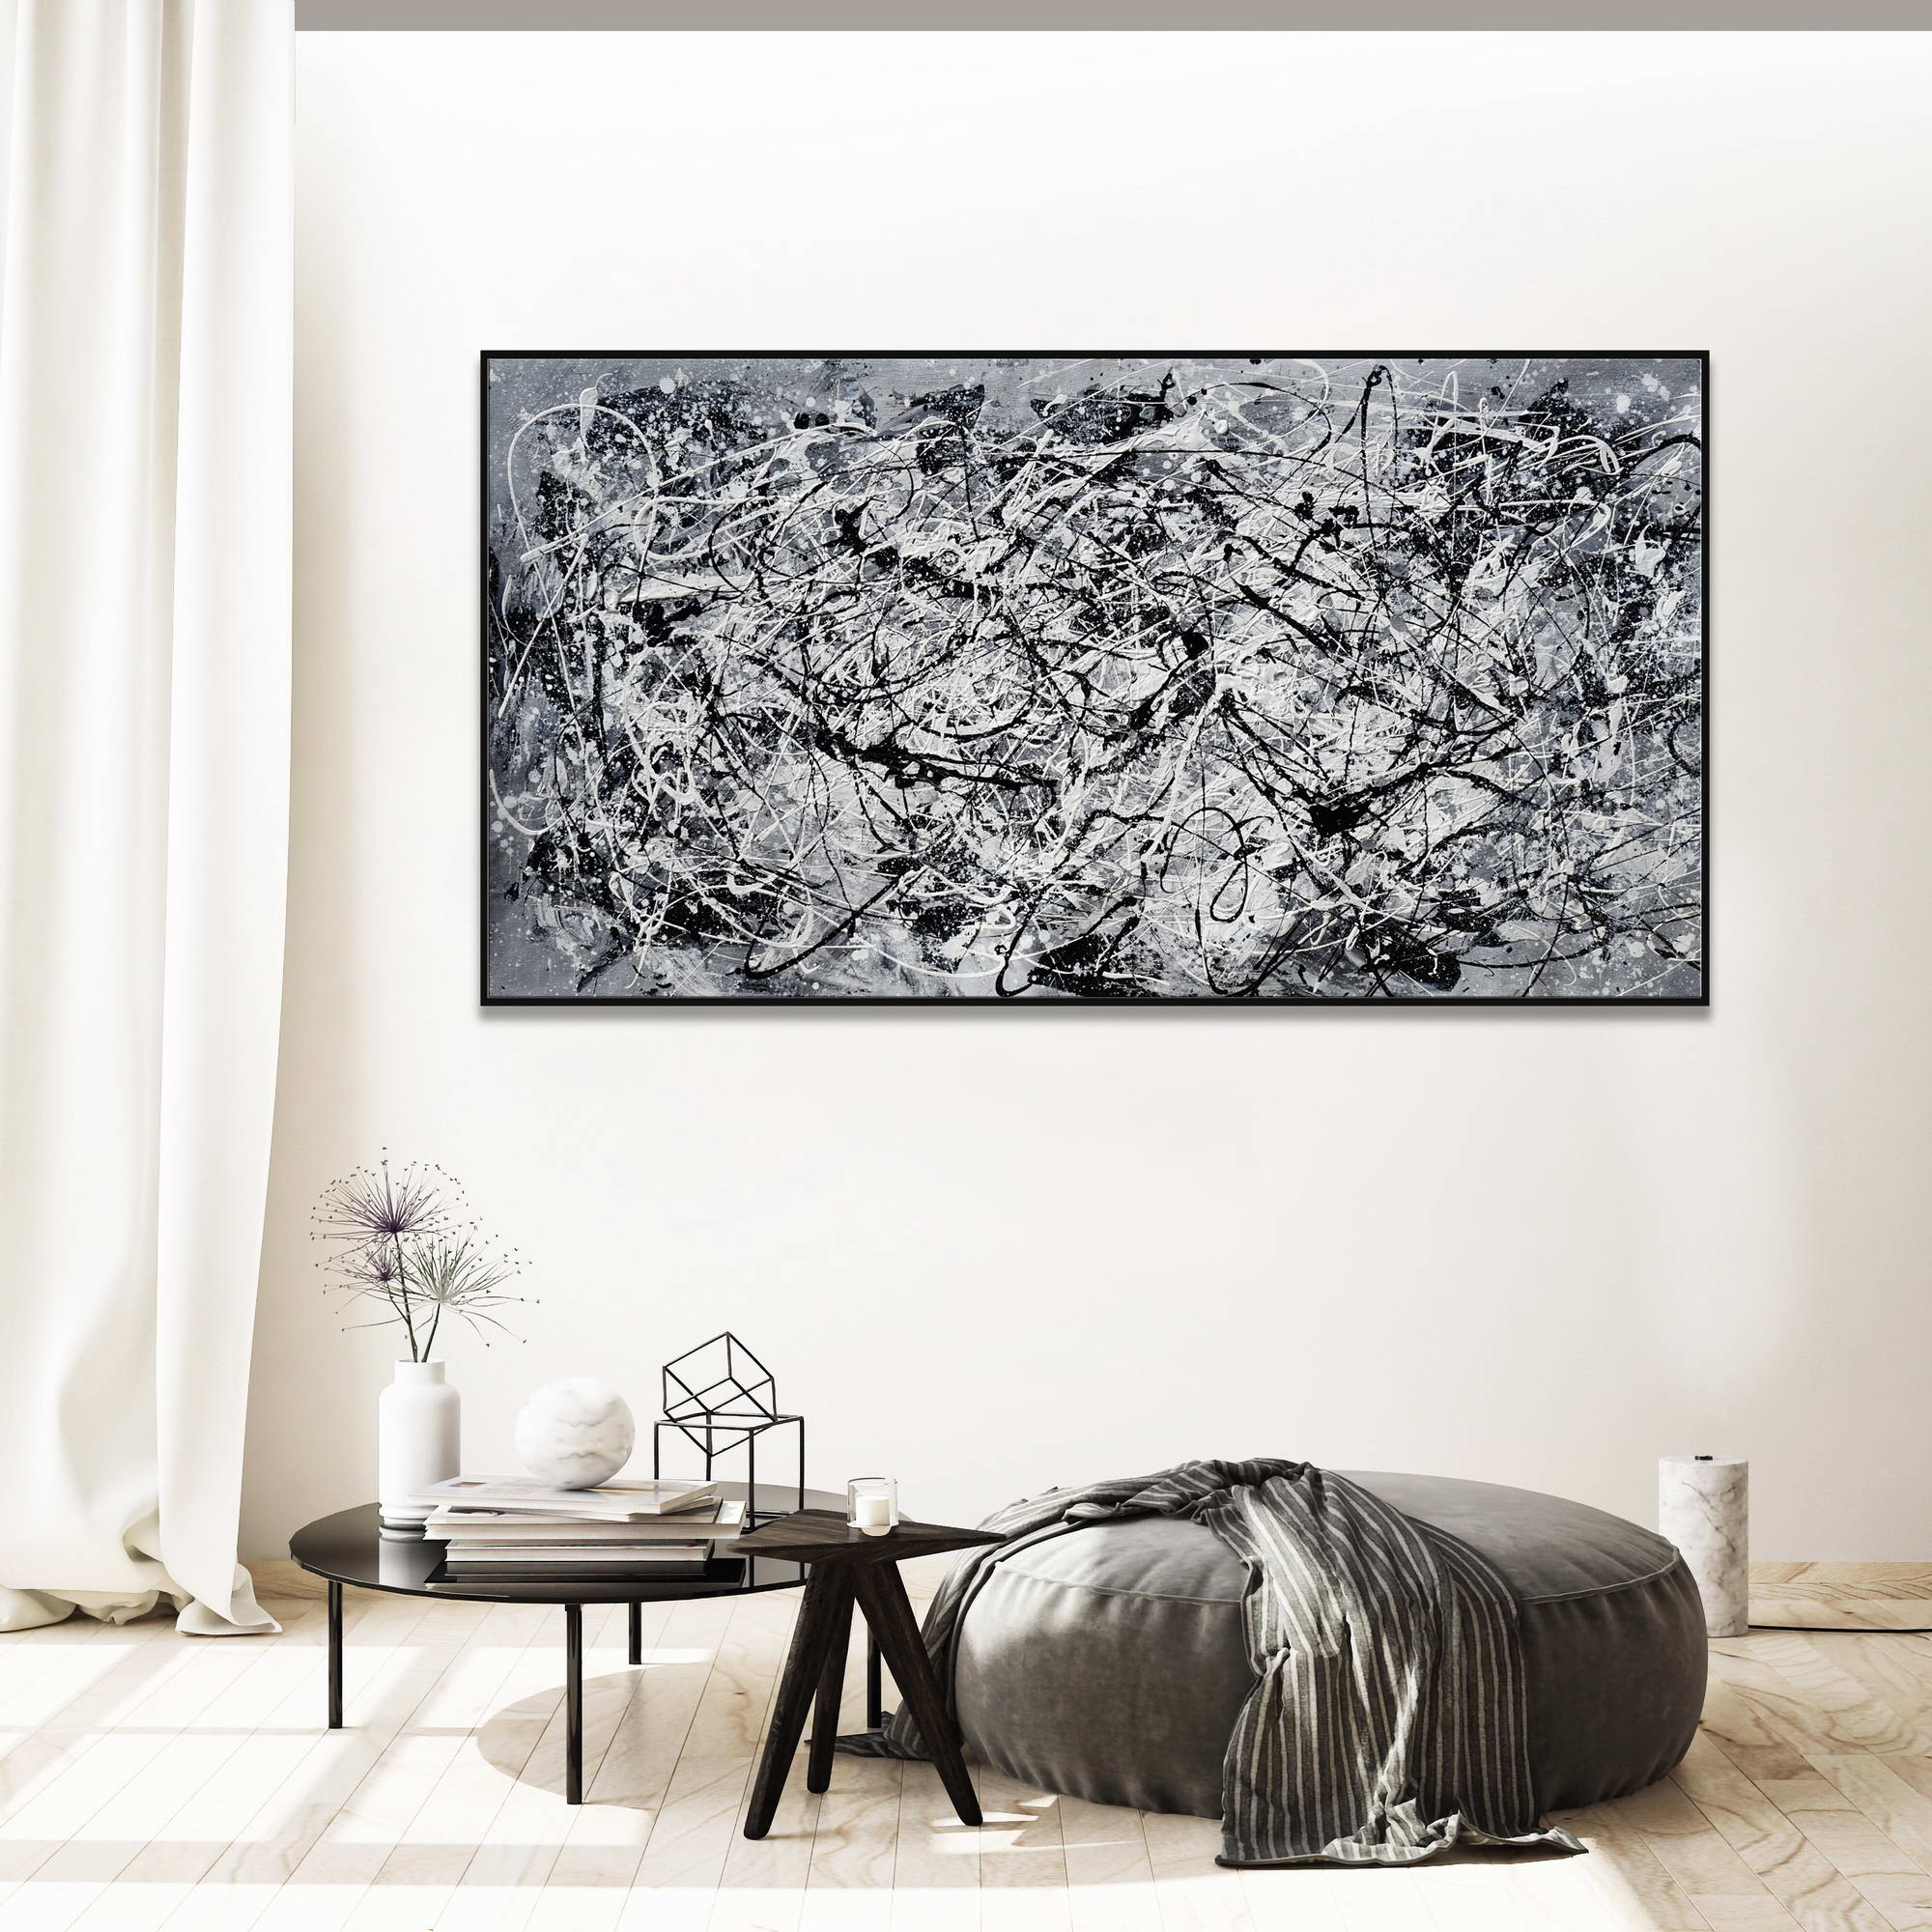 Hand painted Abstract Black and White Pollock style 75x150cm